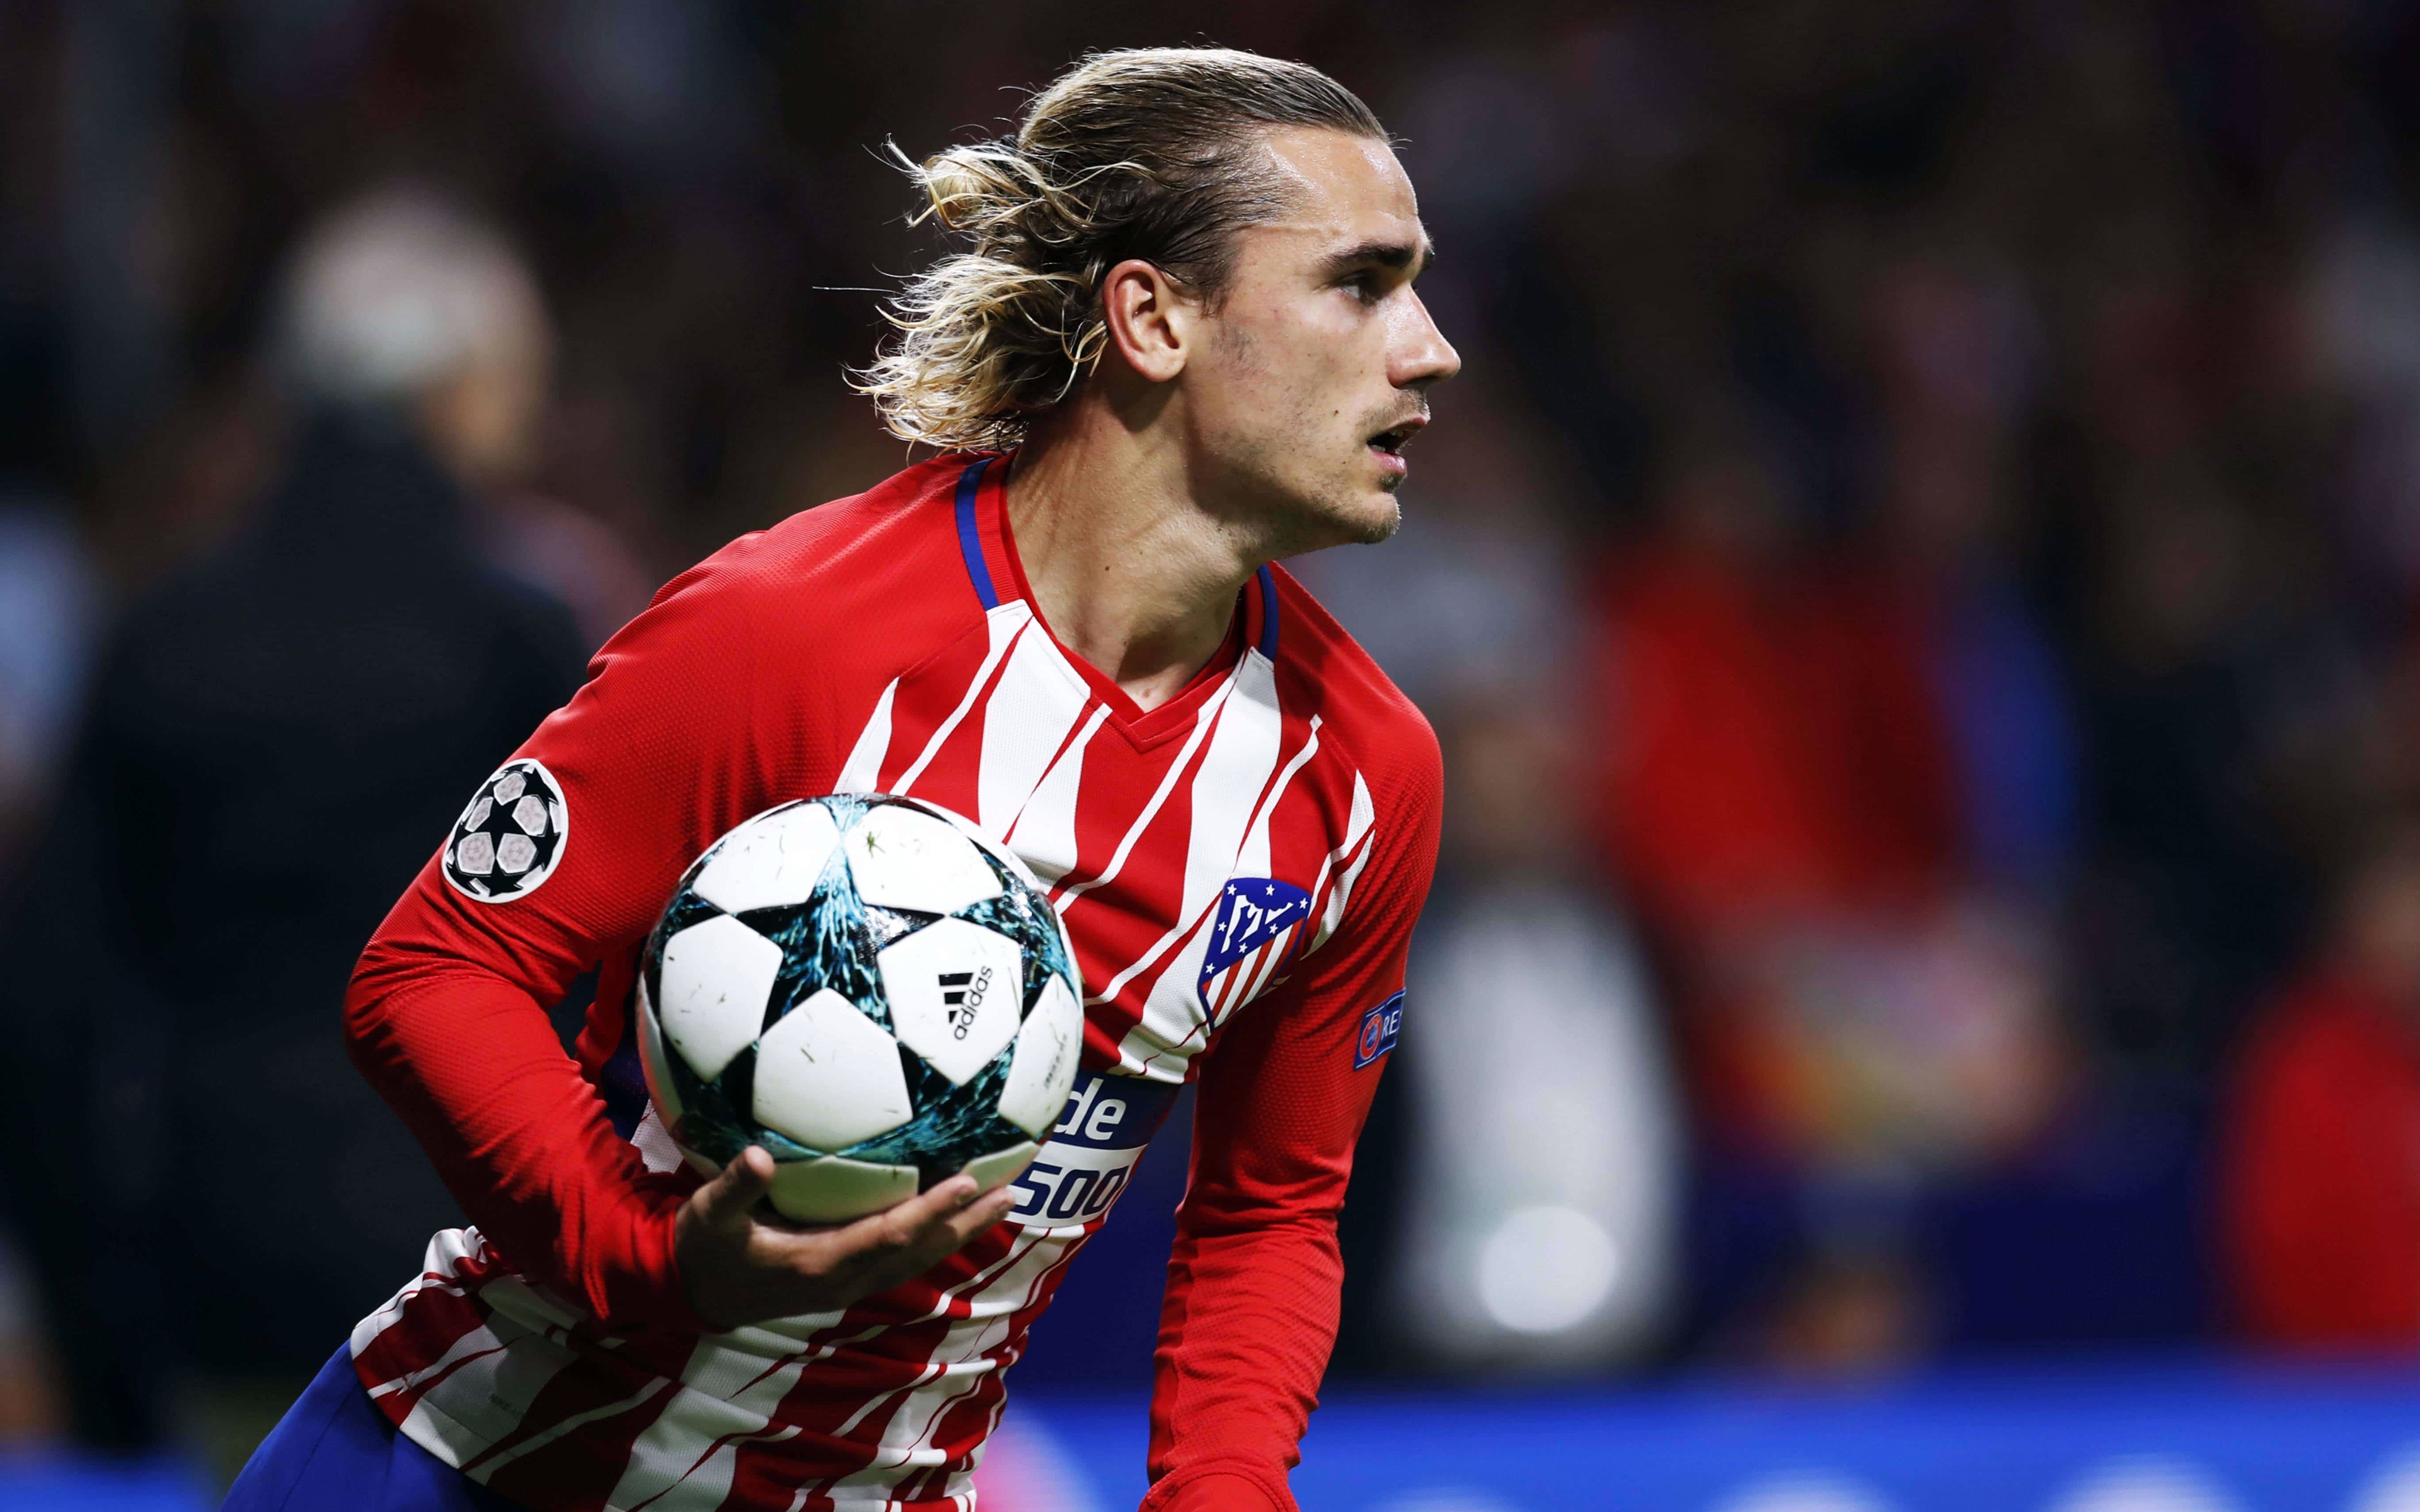 Download Antoine Griezmann wallpapers for mobile phone free Antoine  Griezmann HD pictures